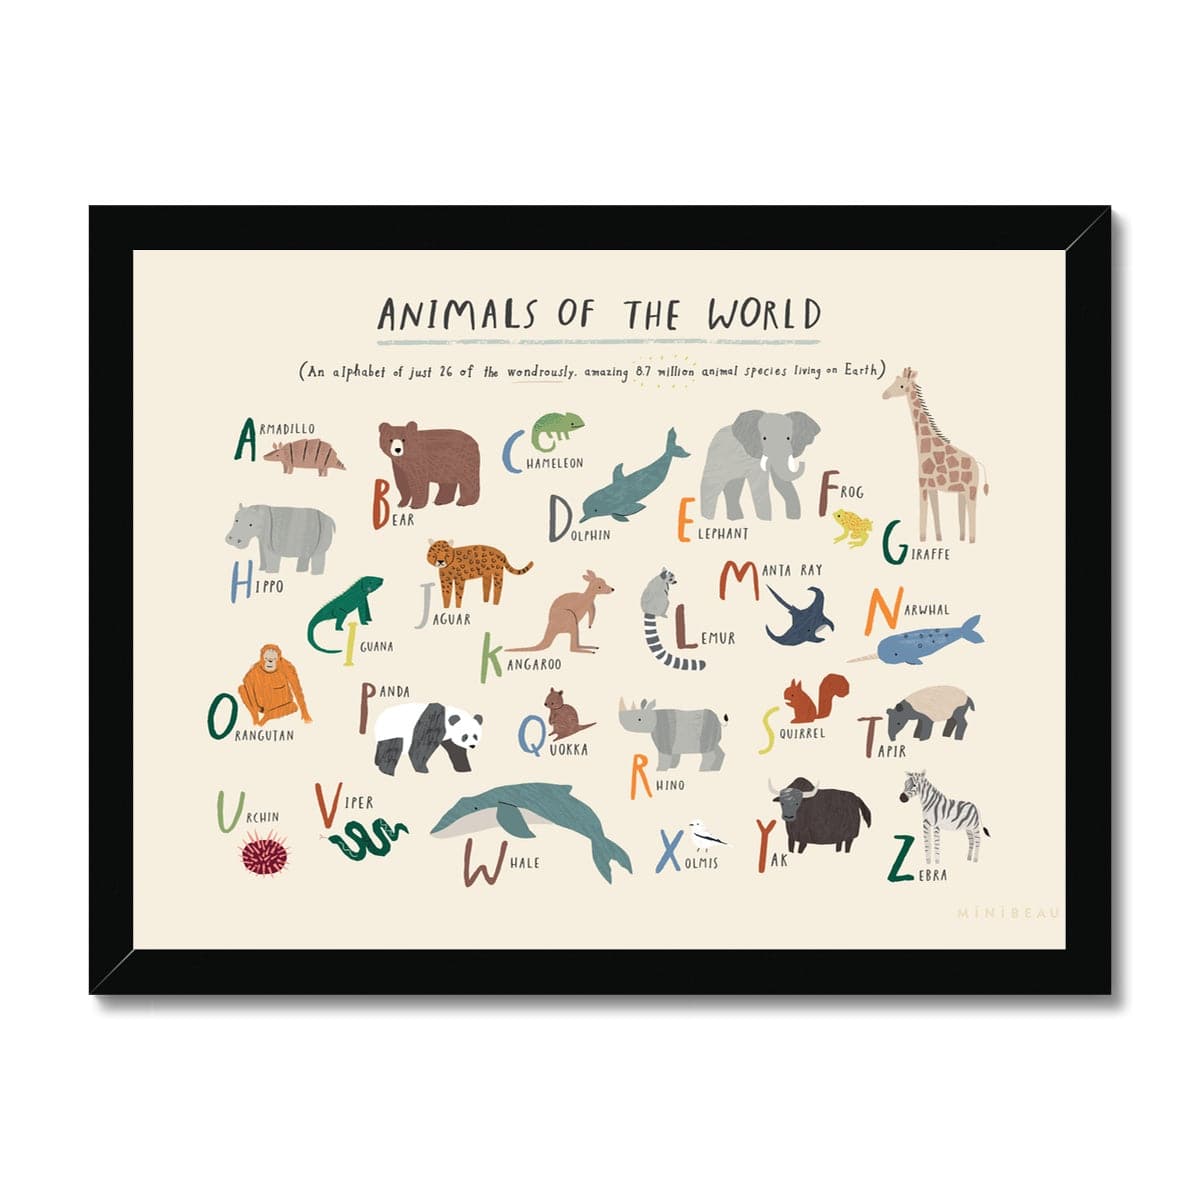 Art print in a black frame. Our animals of the world art print consists of pictures of animals from around the world representing each letter of the alphabet, including a panda, kangaroo, viper and chameleon. Has text at the top saying animals of the world in large font and the text - An alphabet of just 26 of the wondrously, amazing 8.7 million animal species living on earth in brackets as a sub heading.